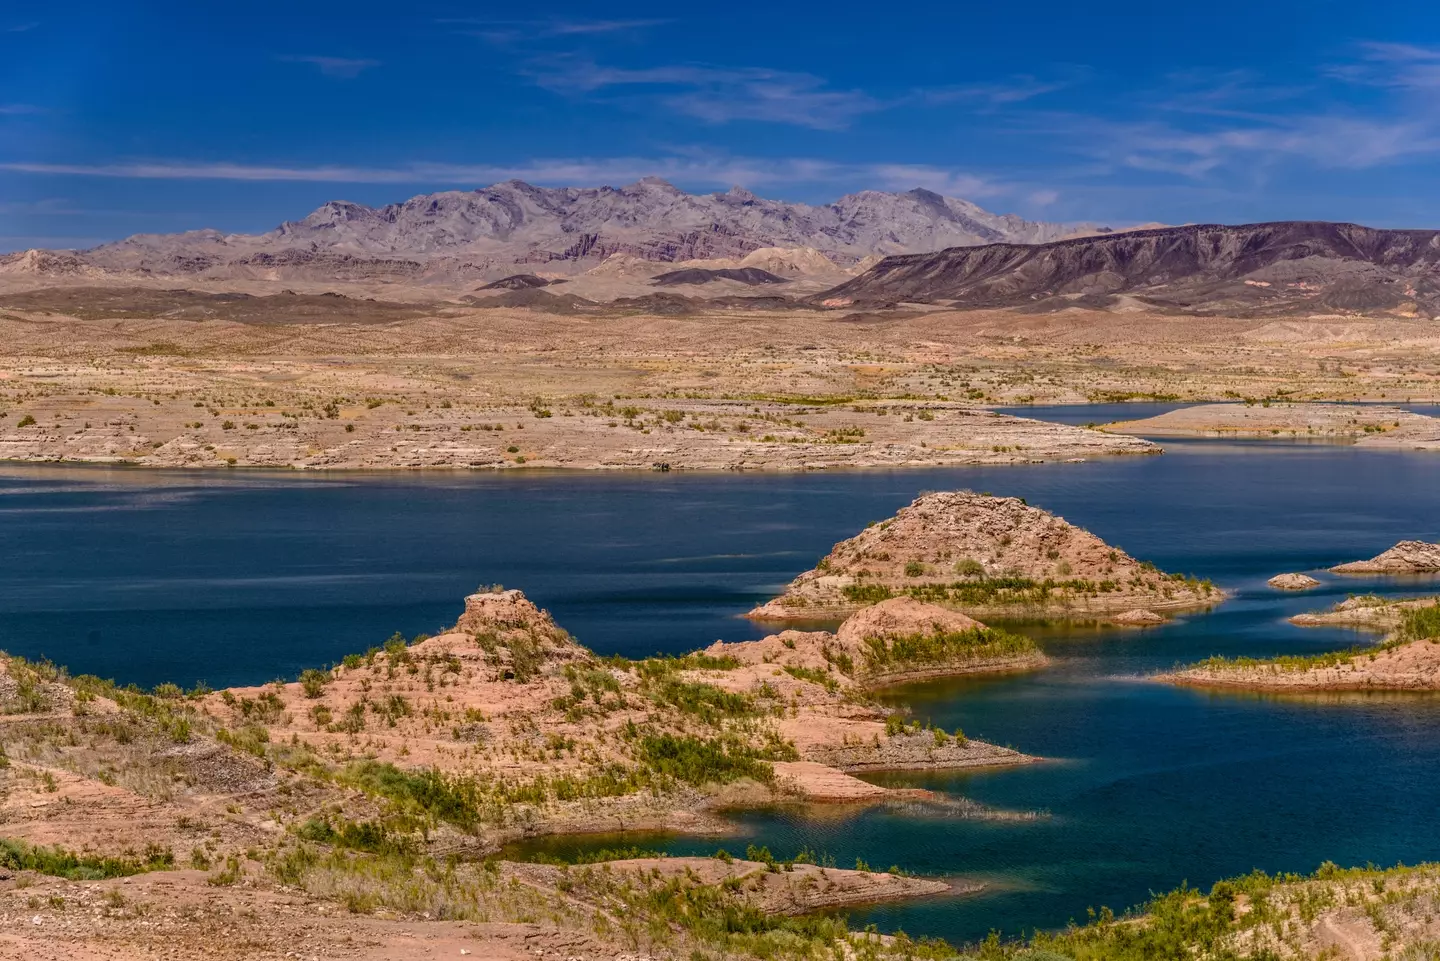 One of the sets of human remains found in Lake Mead has been identified.